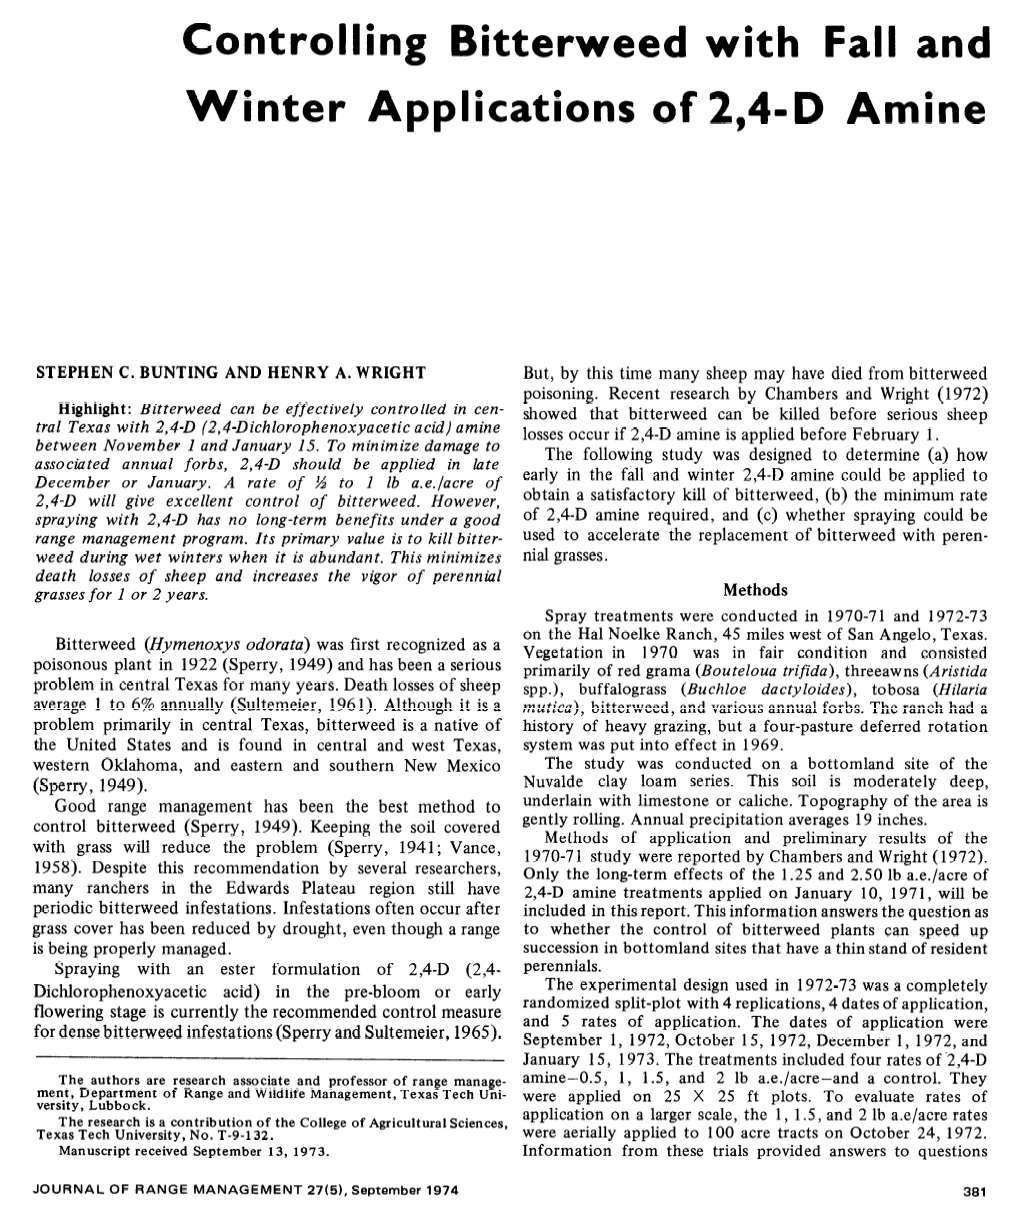 Controlling Bitterweed with Fall and Winter Applications of 2,4-D Amine